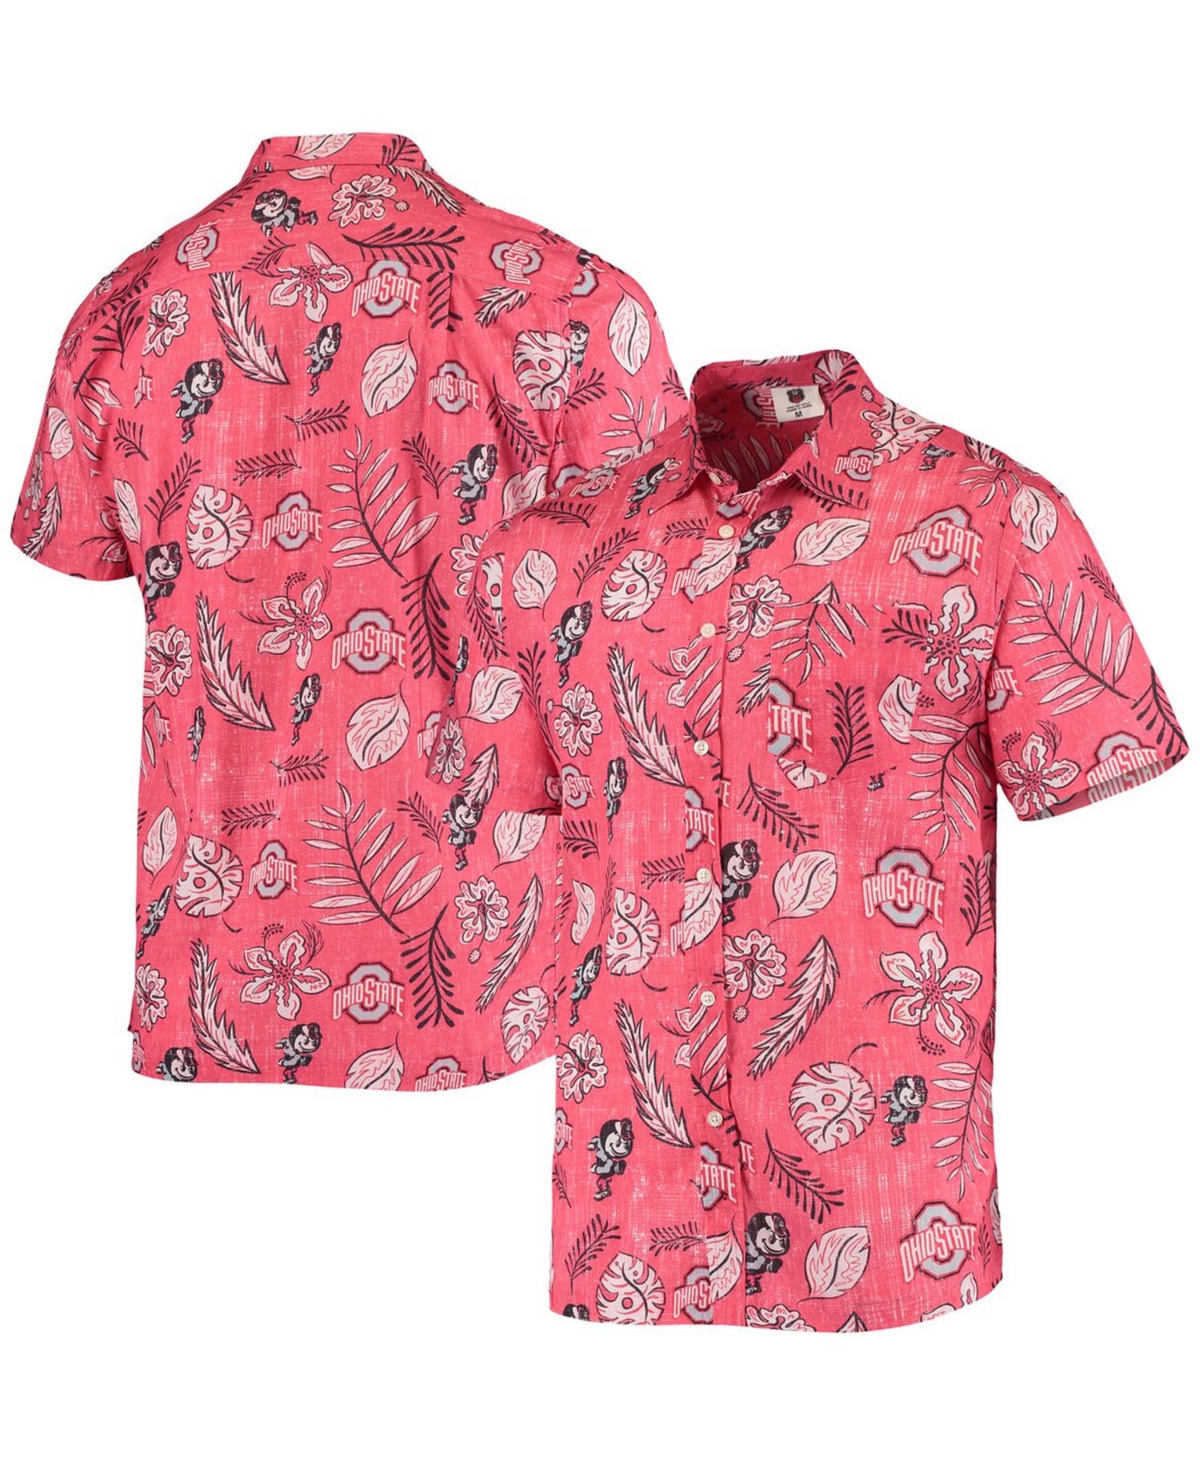 Men's Scarlet Ohio State Buckeyes Vintage-Like Floral Button-Up Shirt - Scarlet